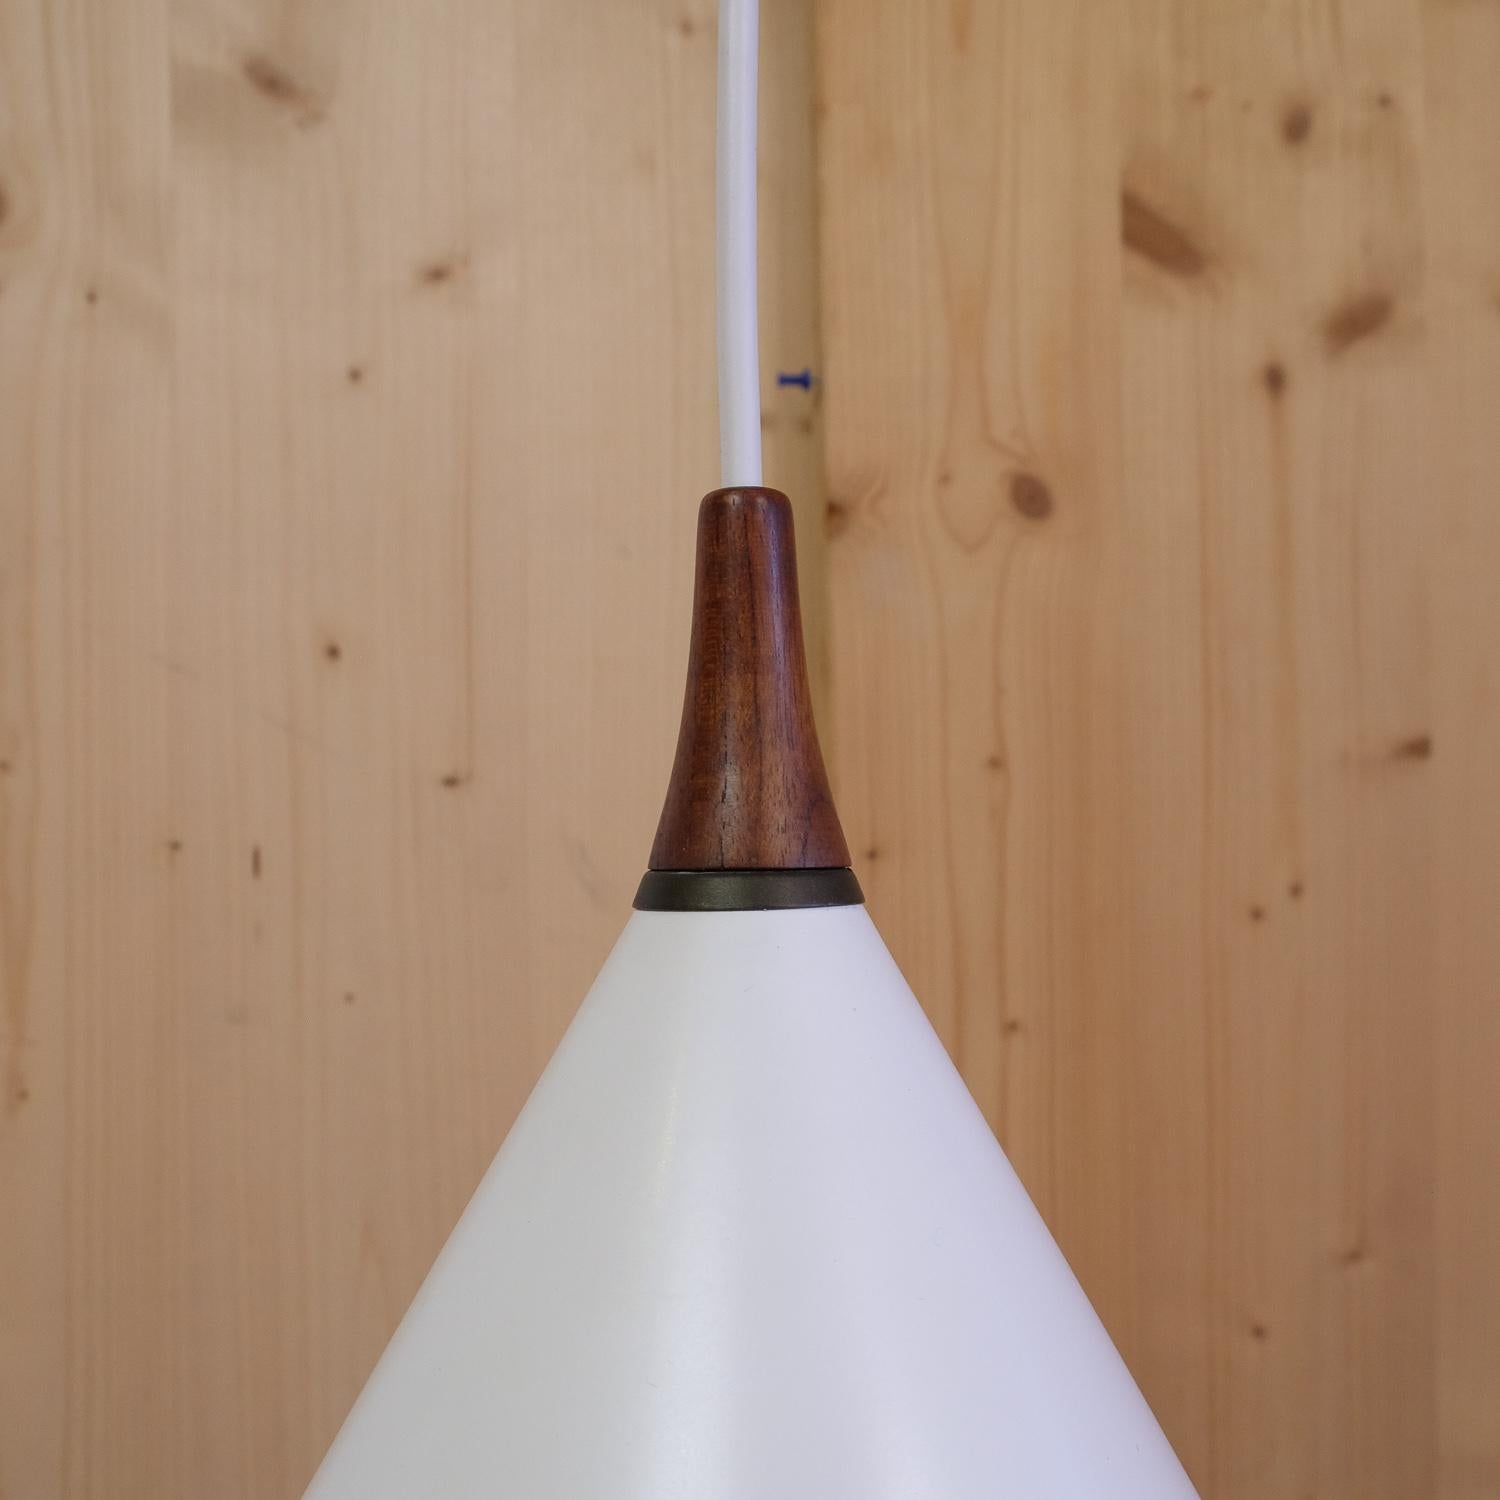 Wall lamp by designer Willem Hagoort, for Hagoort lighting (the Netherlands) during the 1960s.

Lamp shade has an adjustable height, and can be rotated. Electric cabling has been replaced and checked to be in working condition. Aluminum hood and